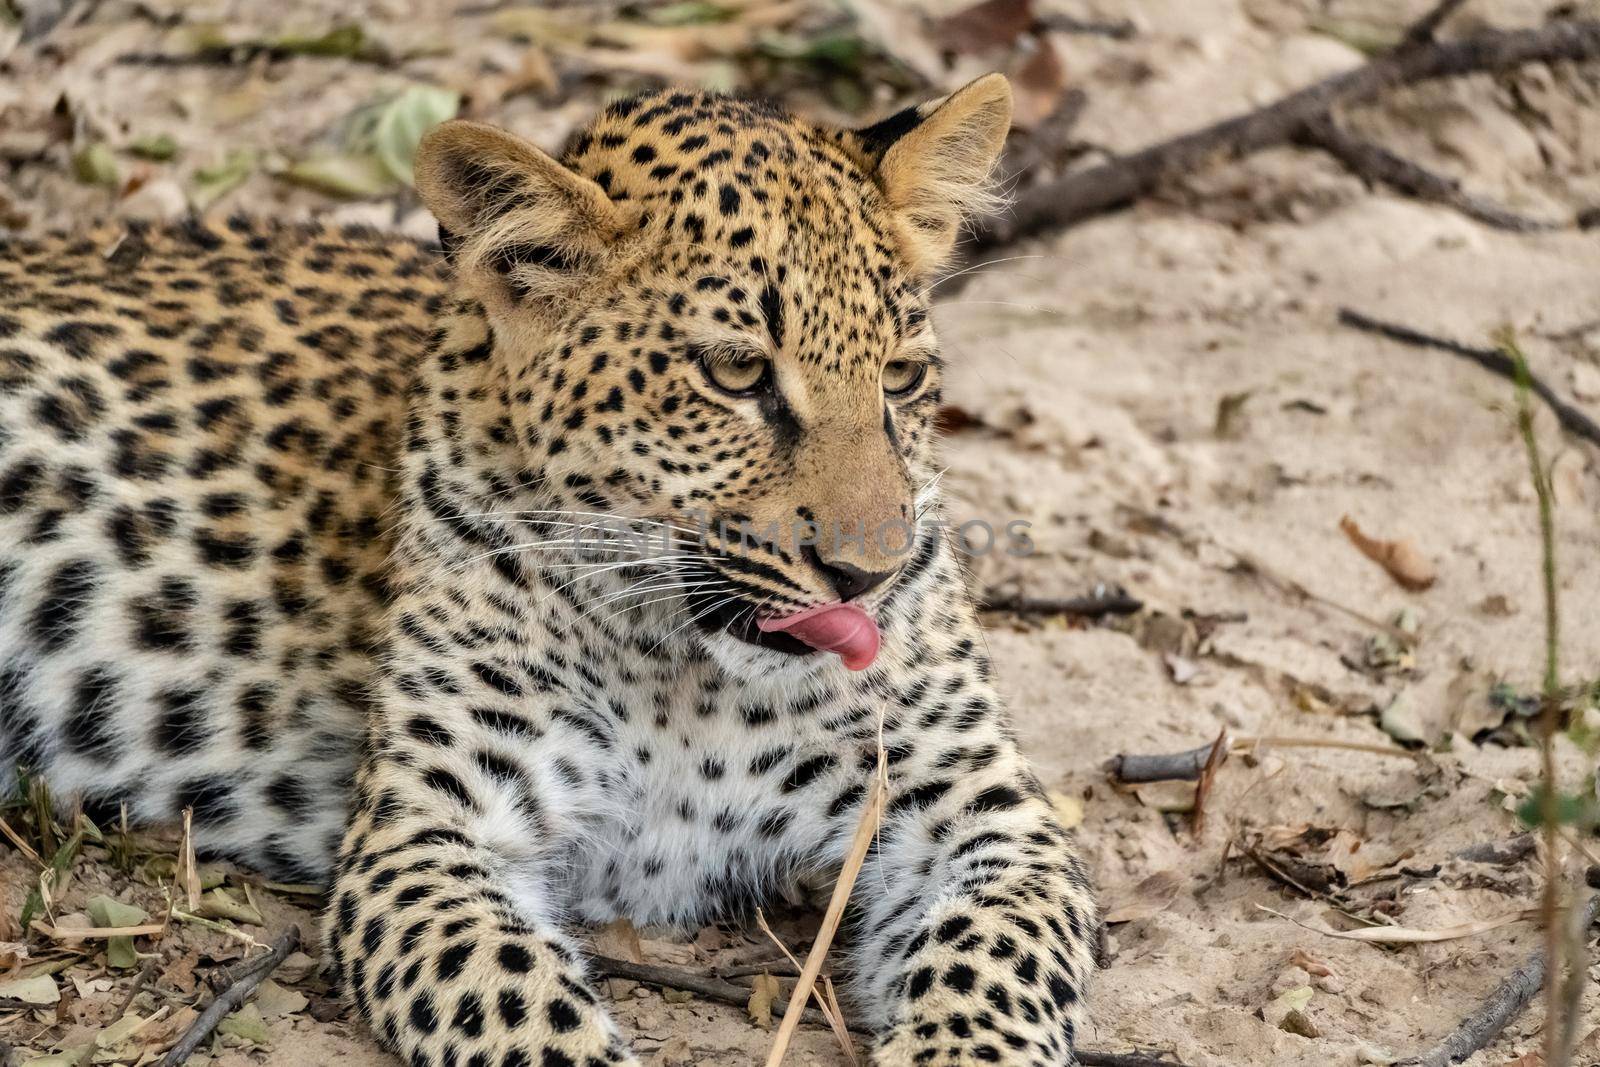 Close-up of a leopard cub resting in the bush after eating by silentstock639